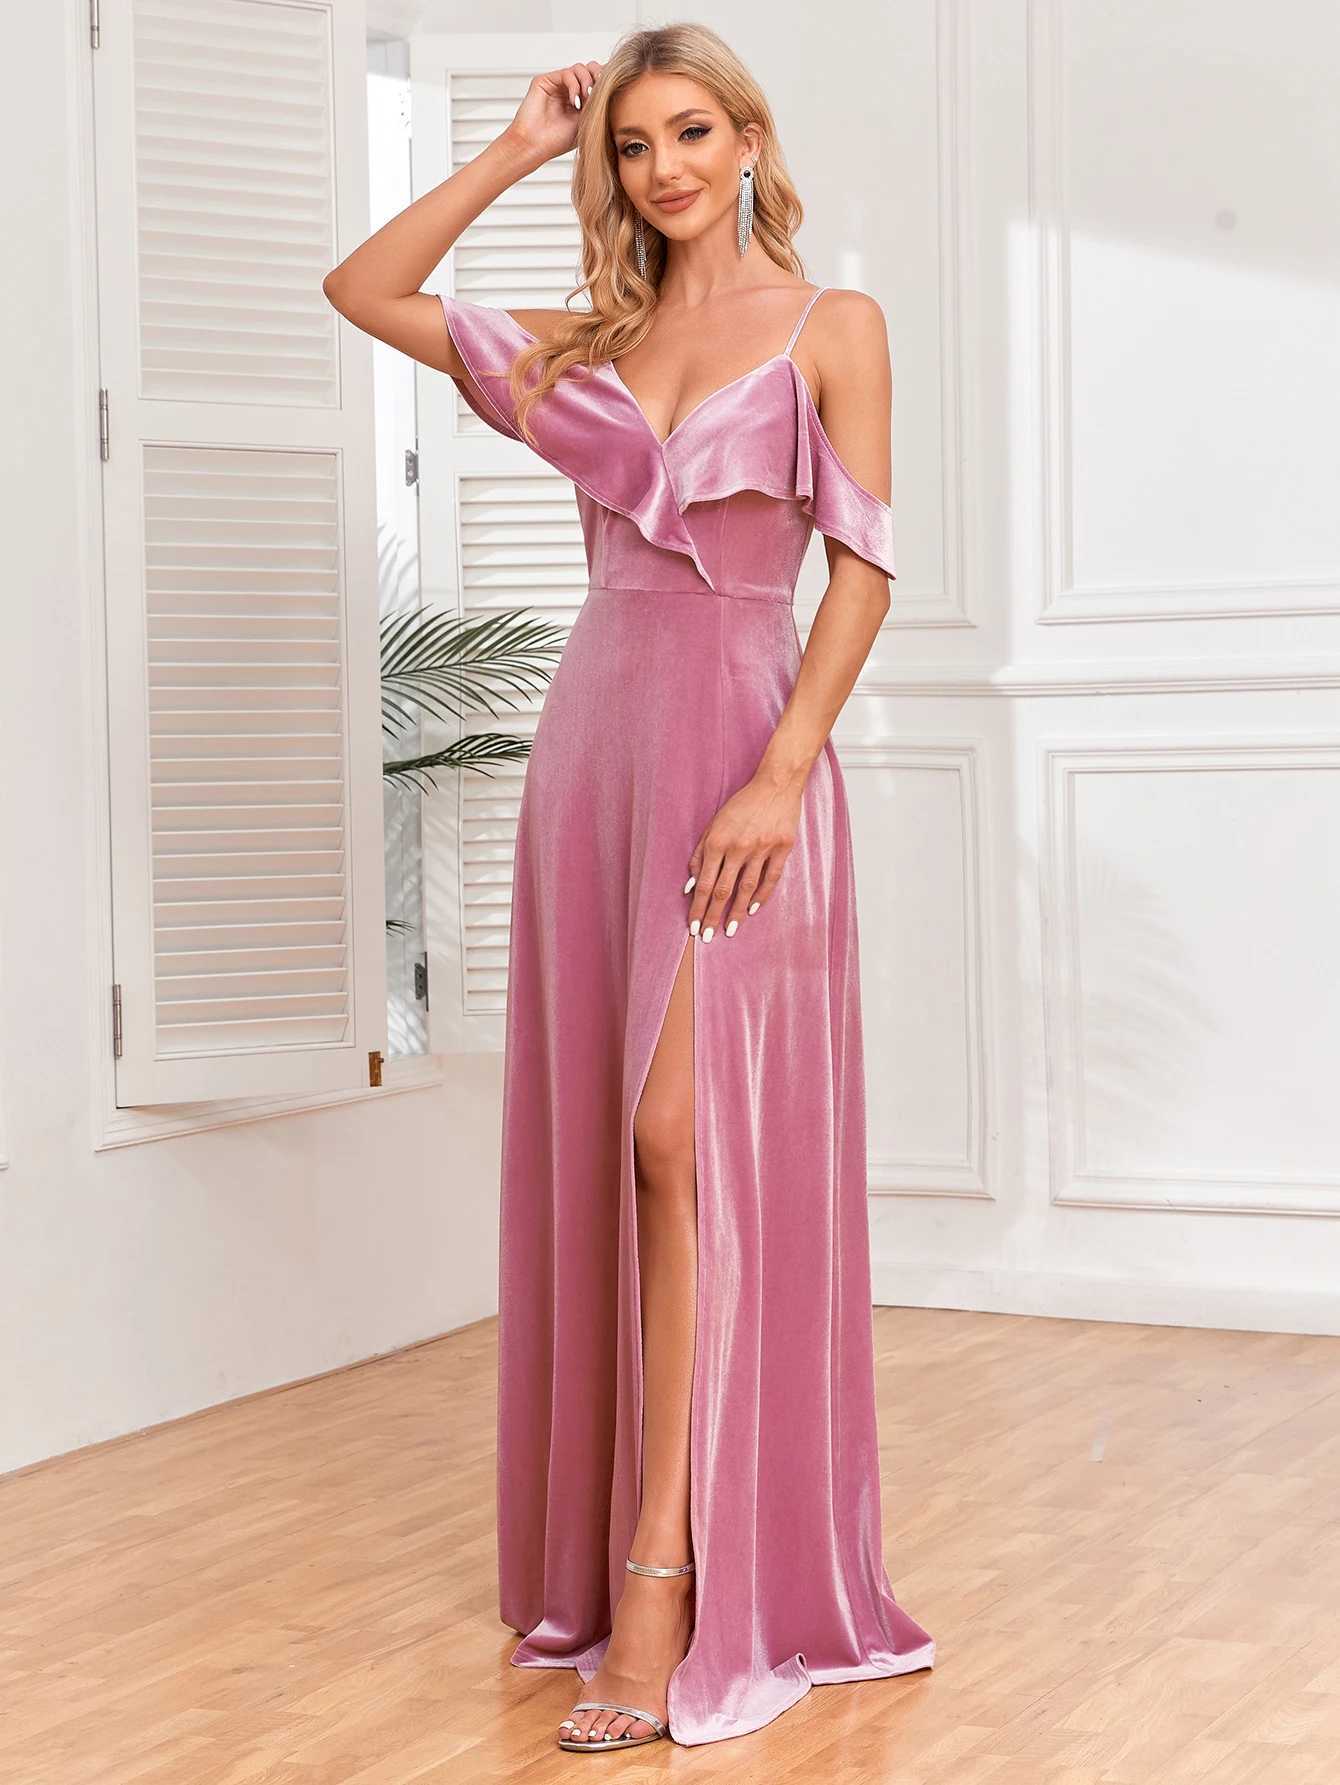 Runway Dresses New Sexy Off-the-shoulder Front Lace Ruffle Slit Long Evening Dress with A-line Hem Velvet Bridesmaid Party Dress Robe De Soire Y240426